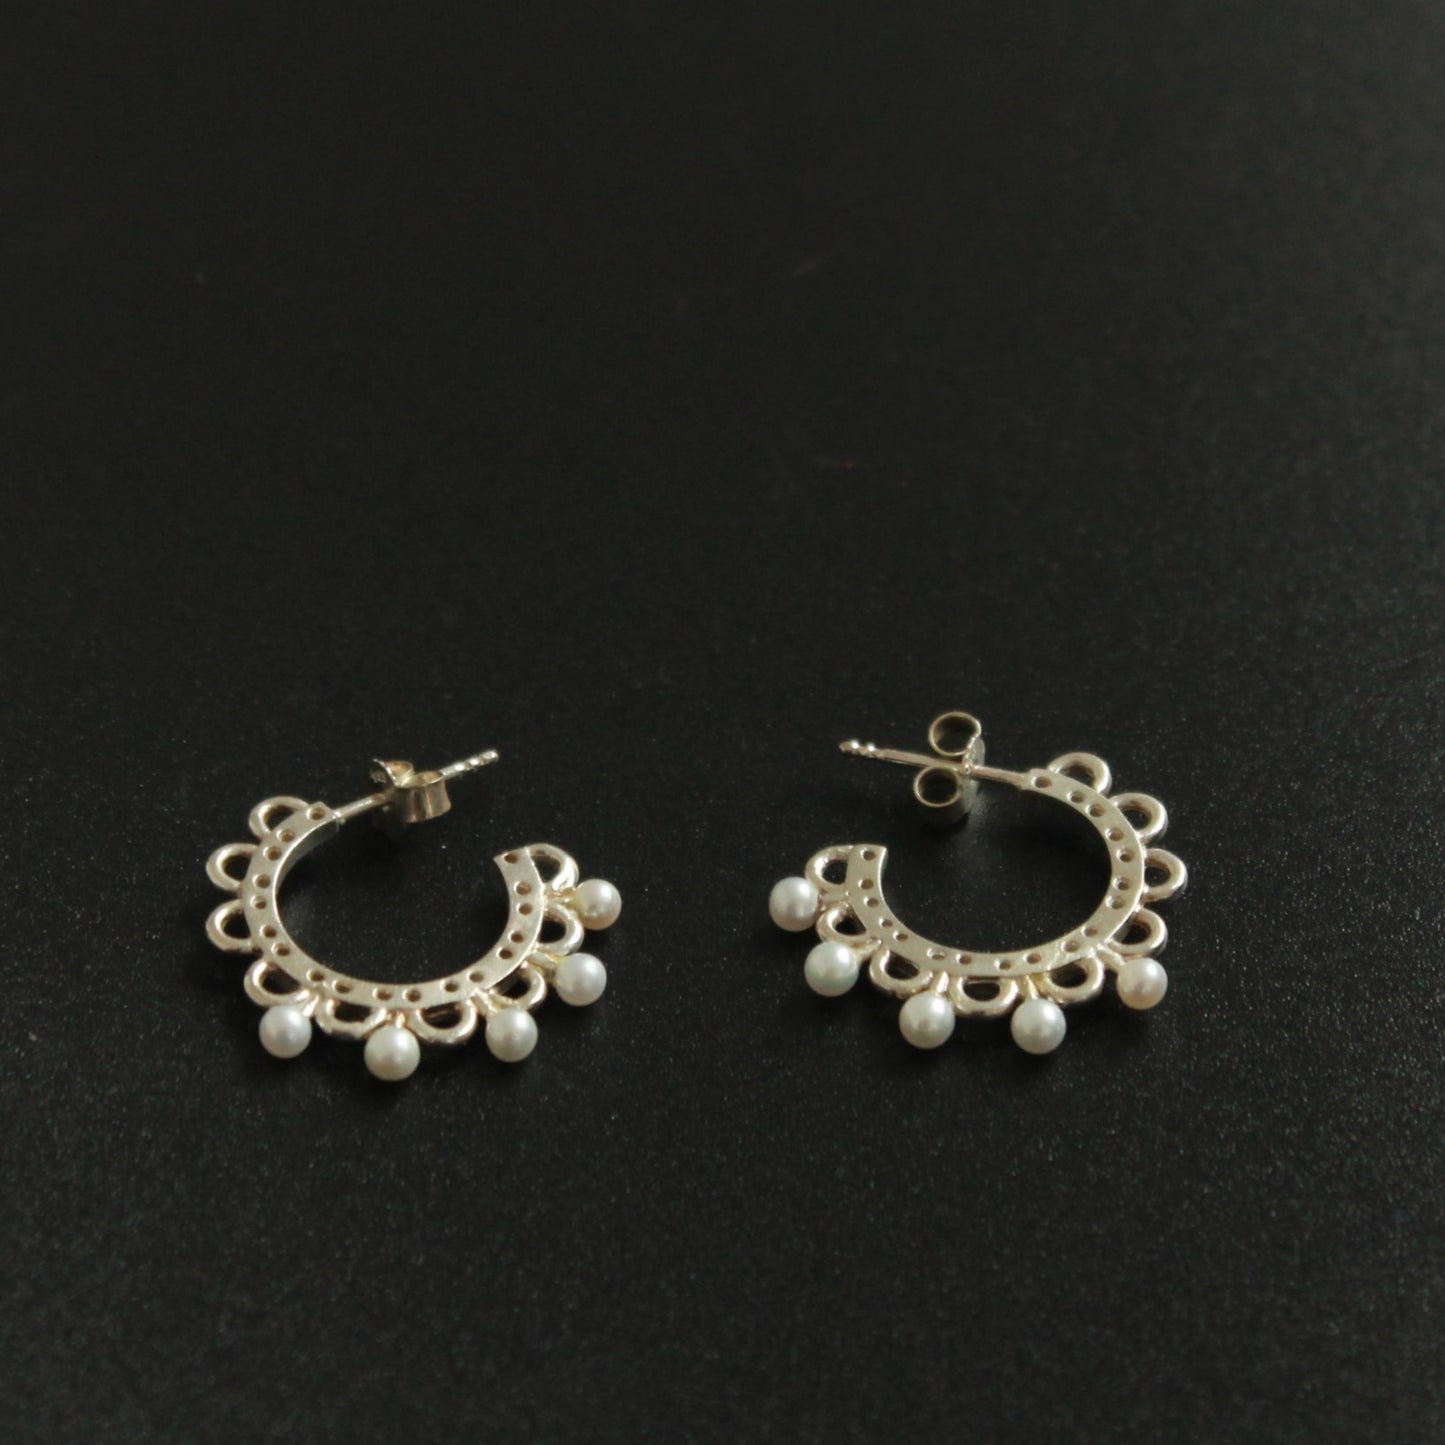 Limerick Lace Inspired Silver and Pearl Earrings - Marianne Kenny